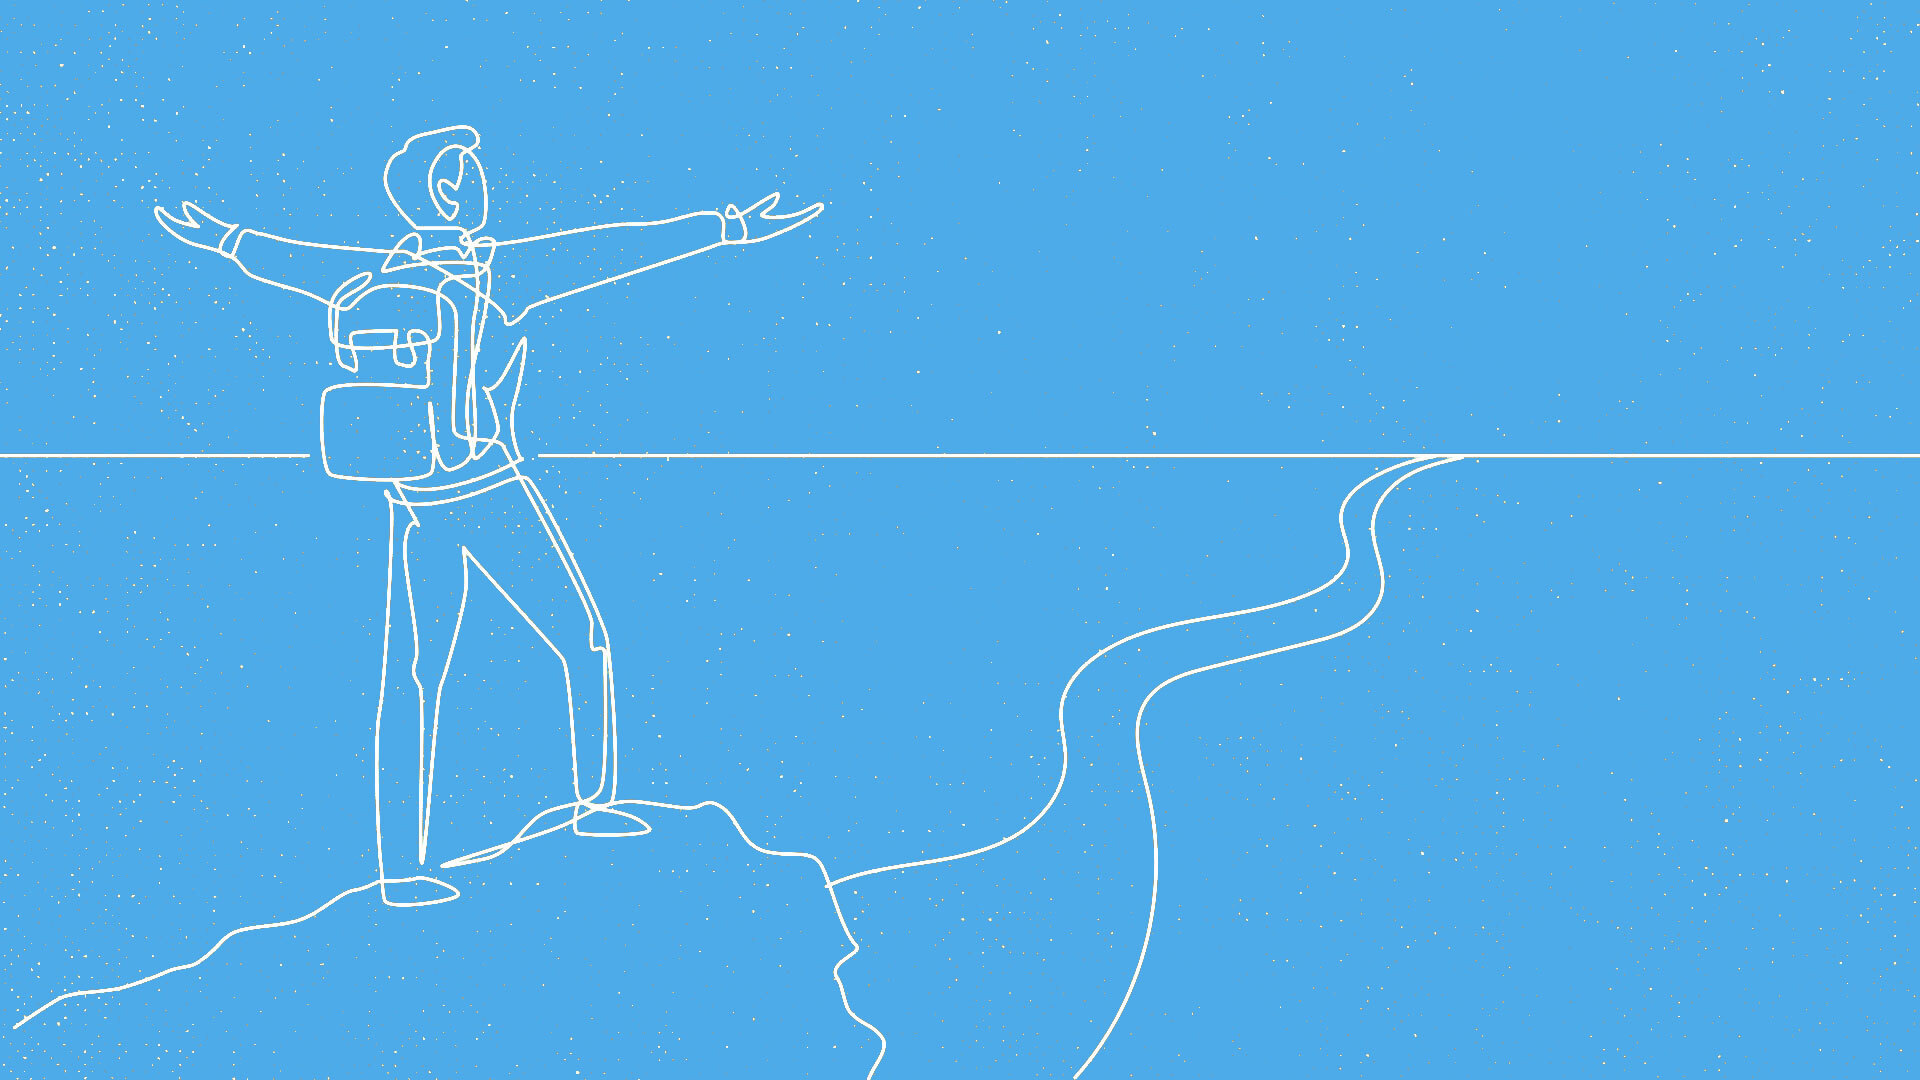 An illustration on a blue background depicting a man wearing a backpack looking ahead at a path